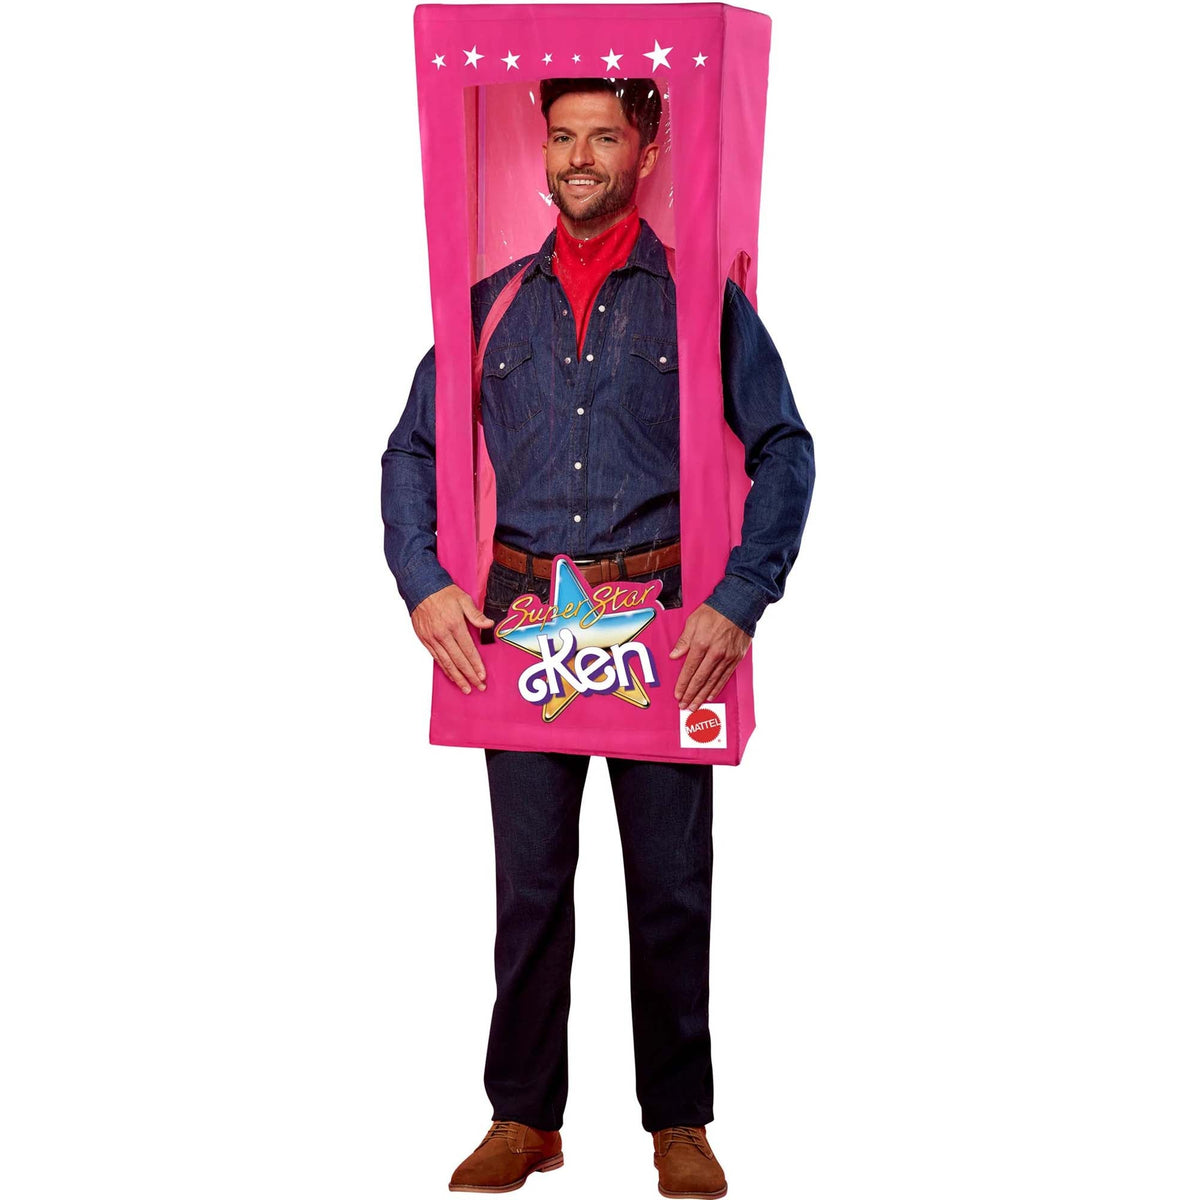 IN SPIRIT DESIGNS Costumes Barbie Ken in a Box Costume for Adults